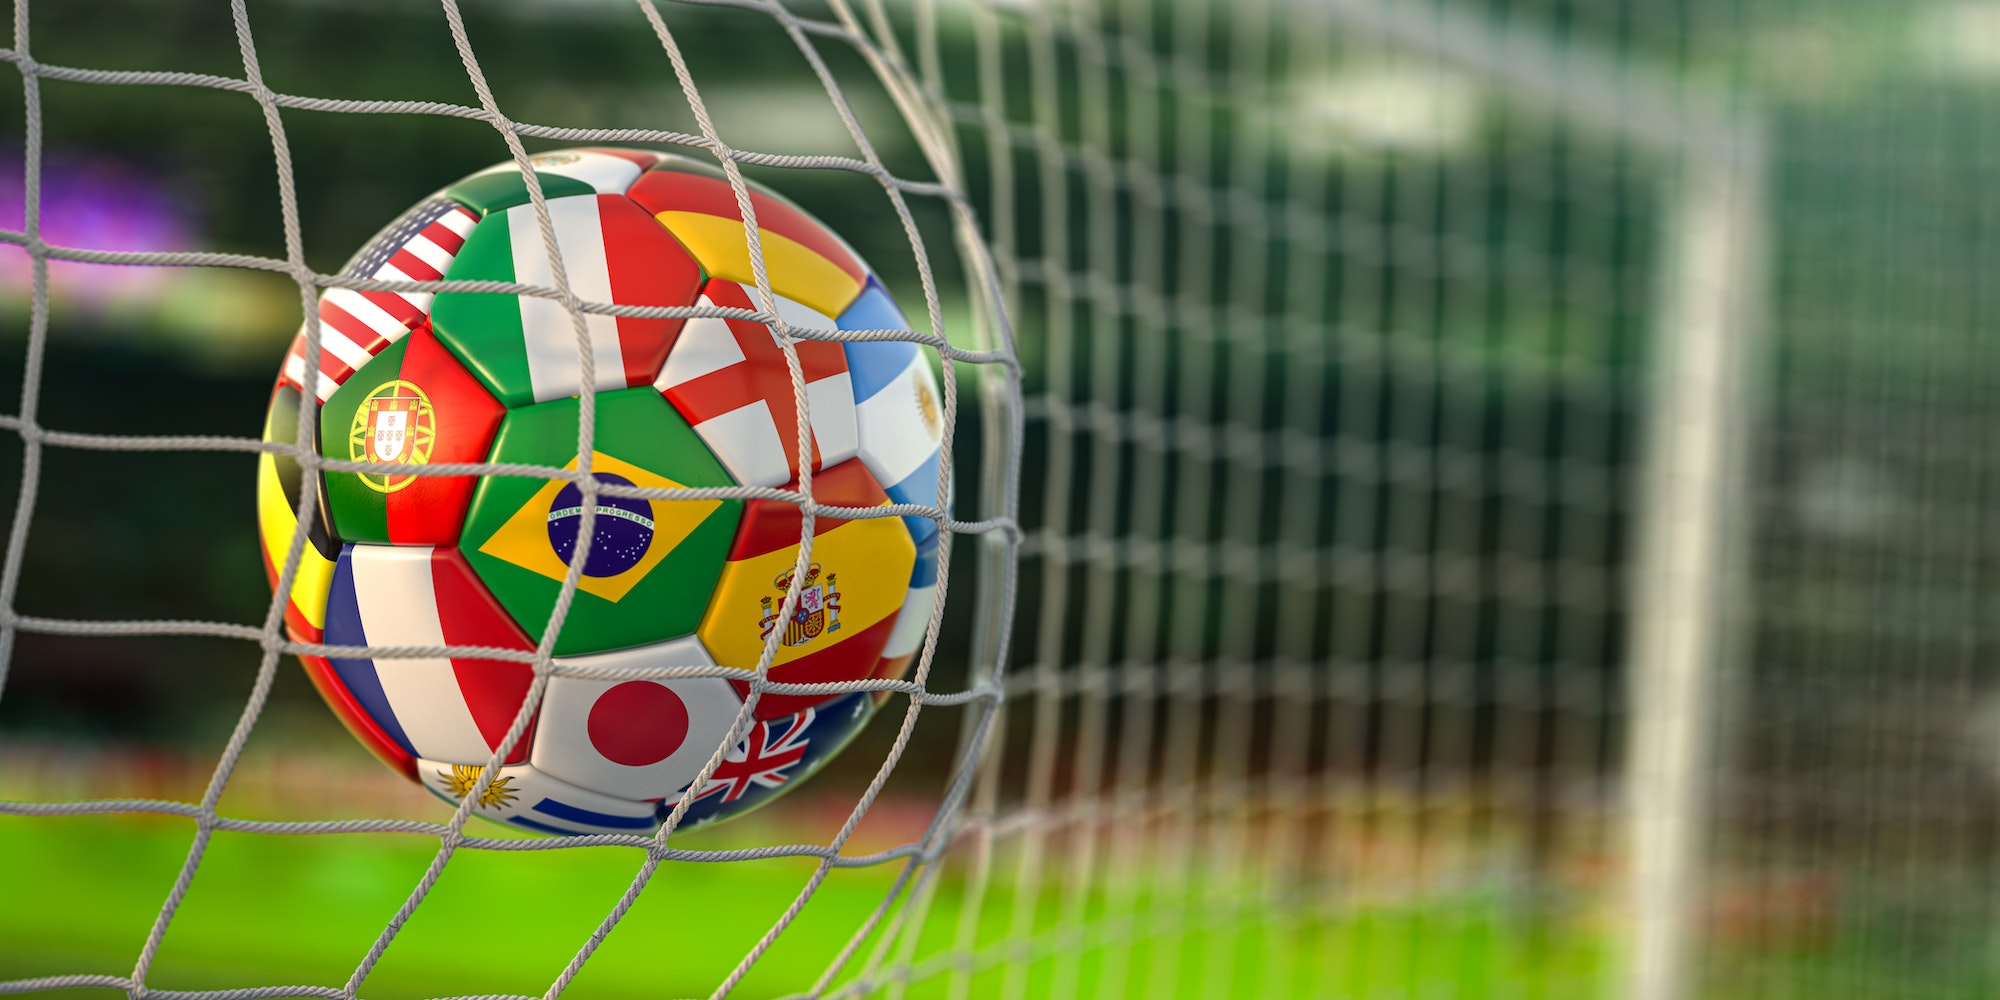 Is your business ready for the 2022 FIFA World Cup?